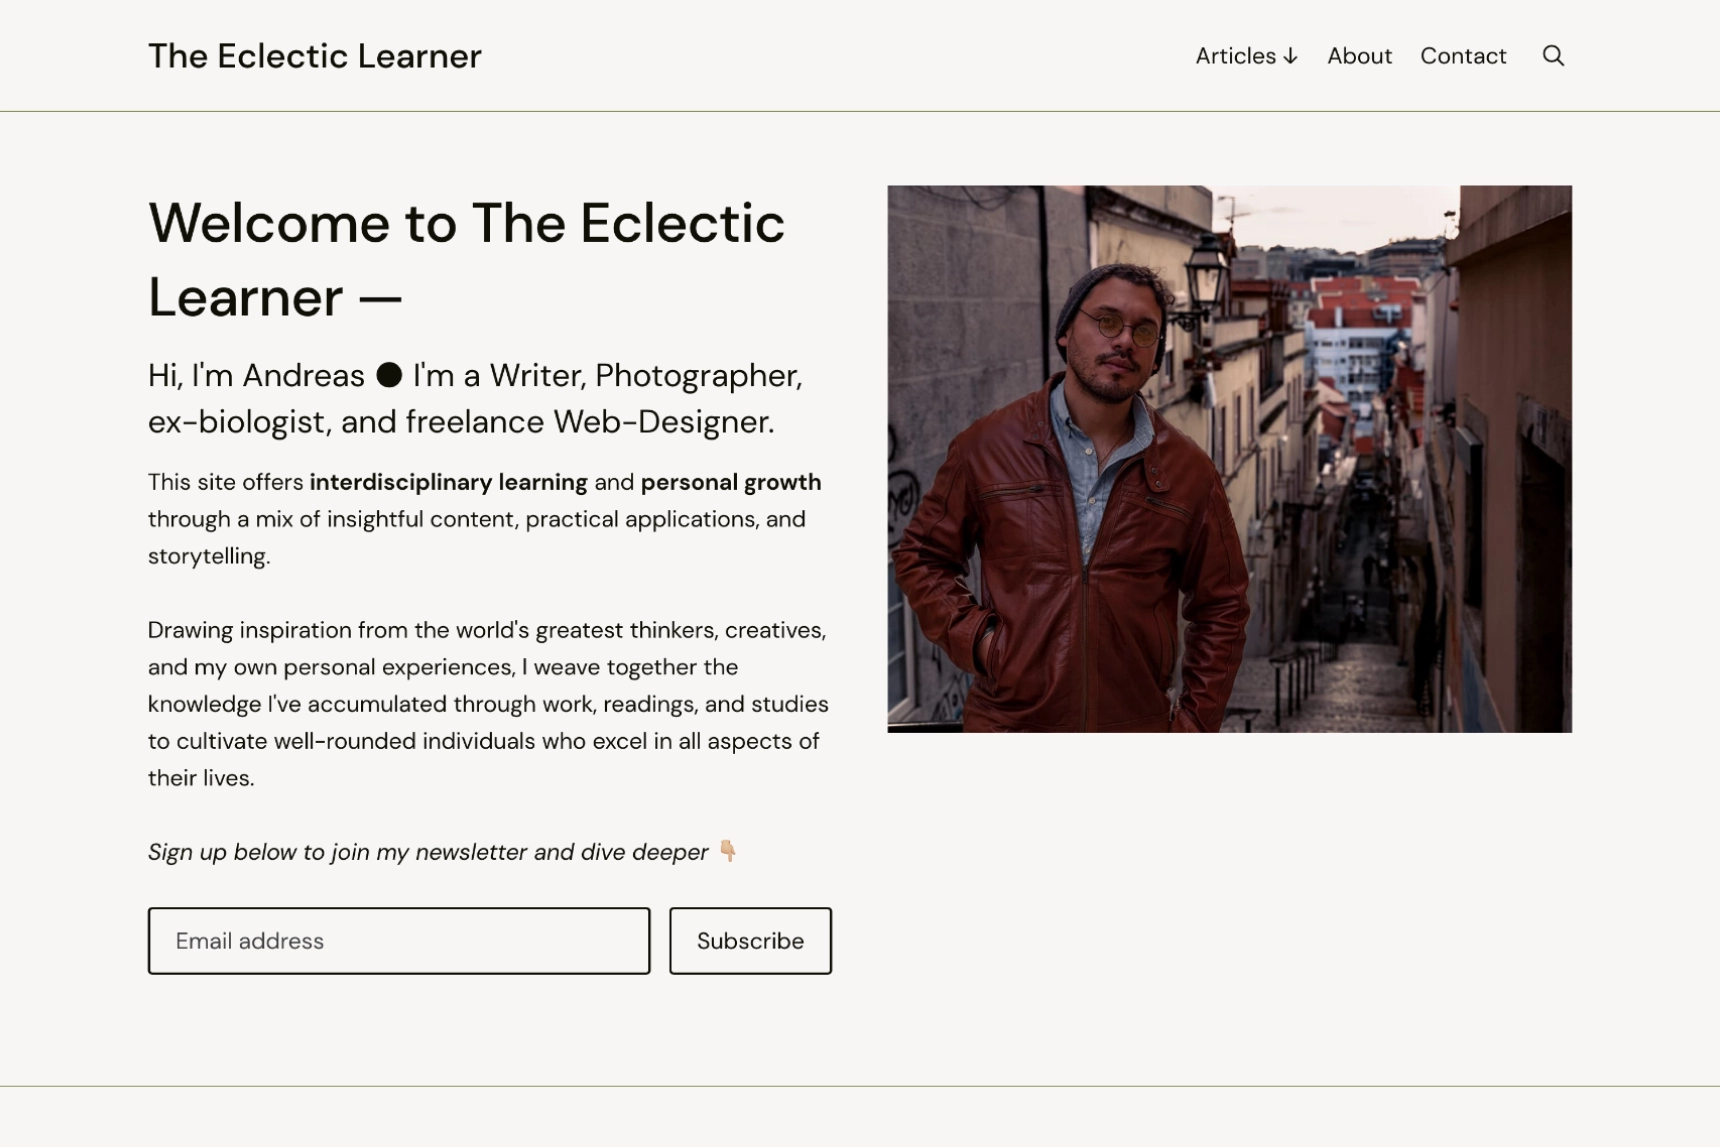 The Eclectic Learner